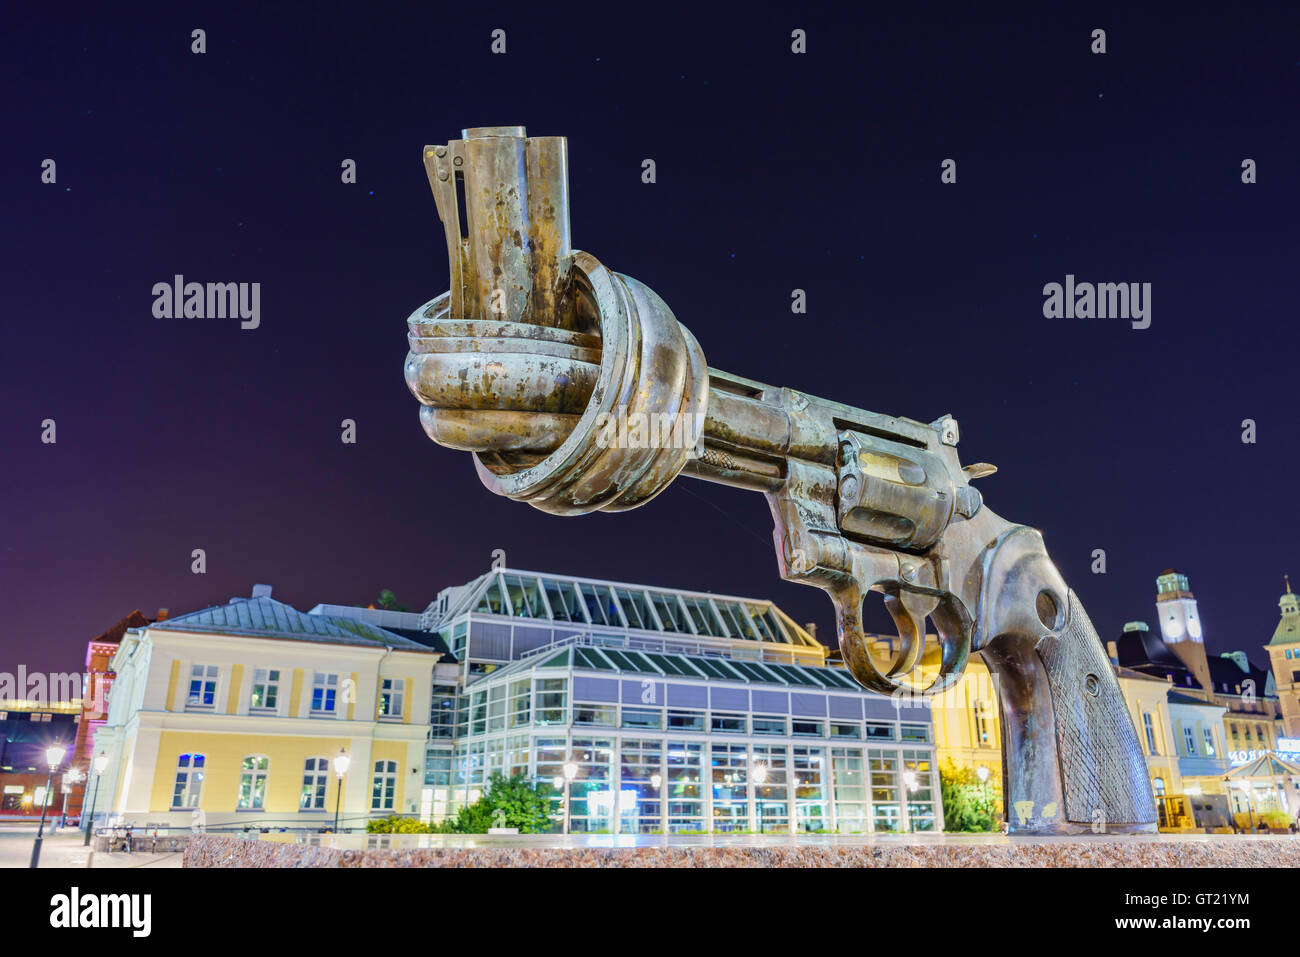 The famous Knotted Gun statue of Malmo at night, Sweden Stock Photo